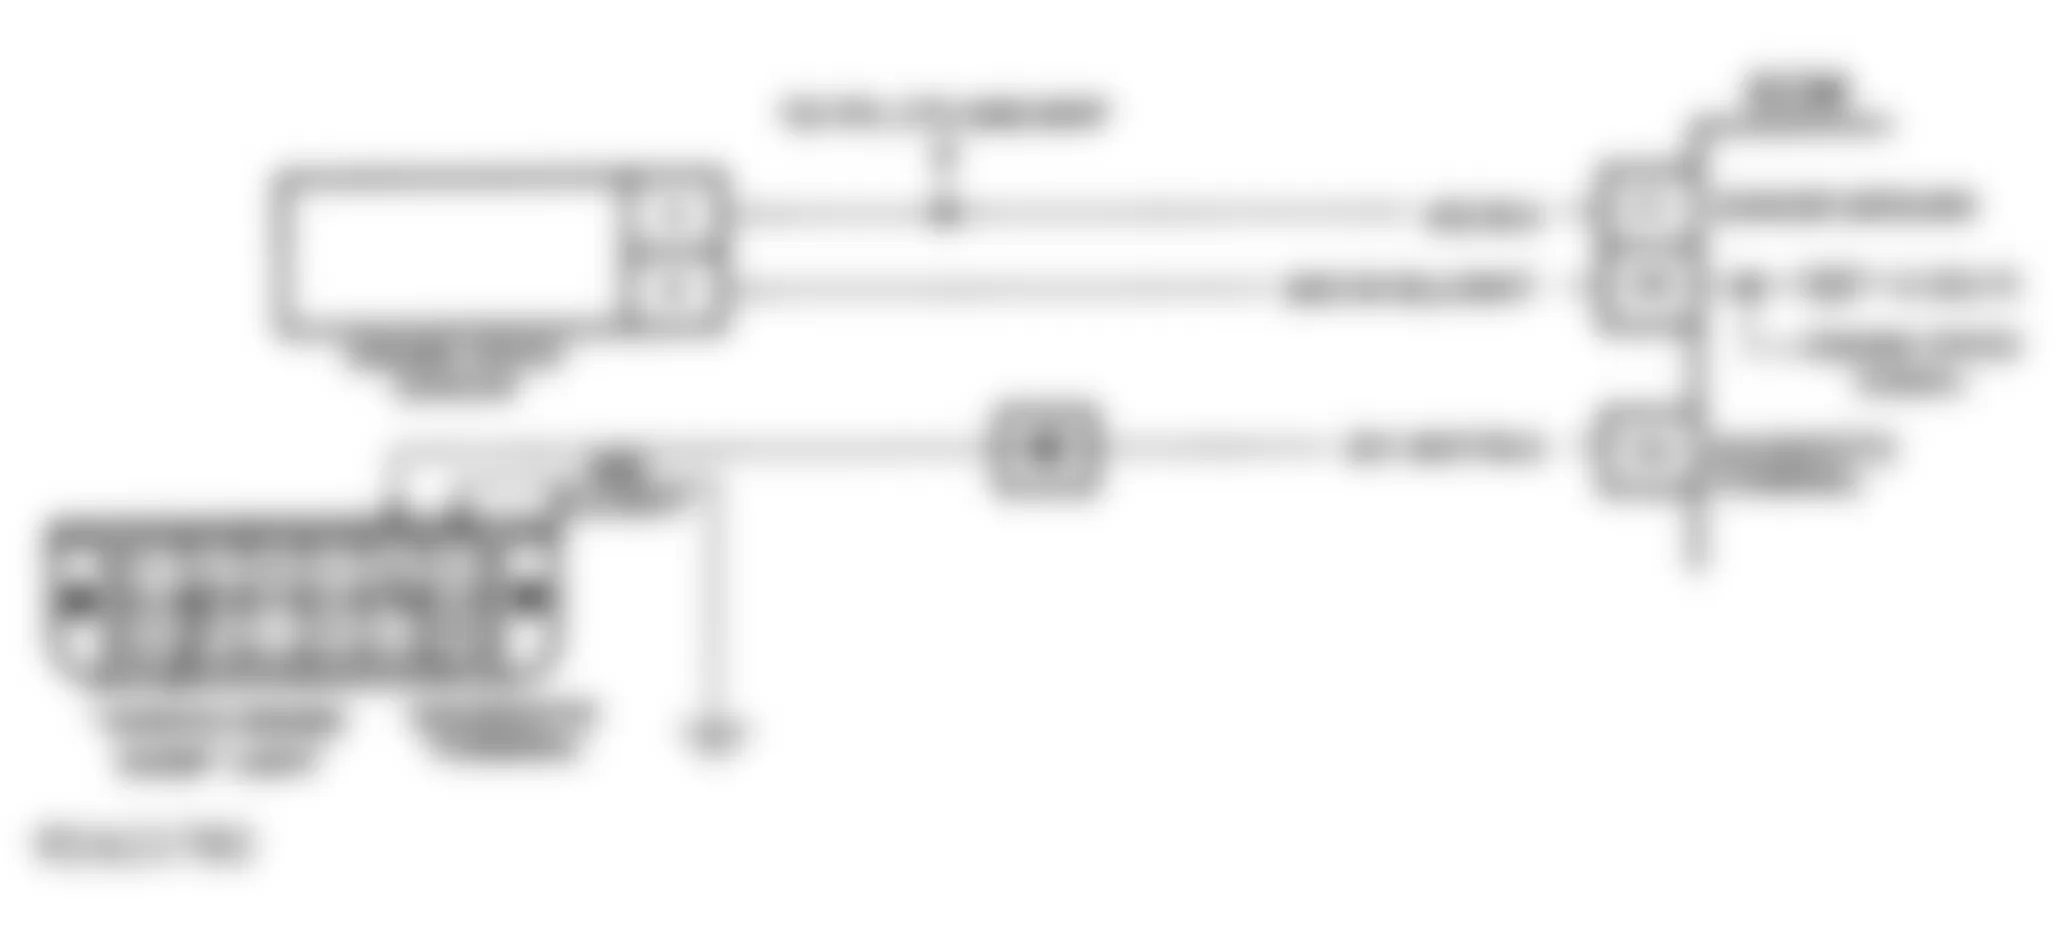 Chevrolet Pickup C1500 1992 - Component Locations -  CODE 12, Schematic, No Reference Pulse G